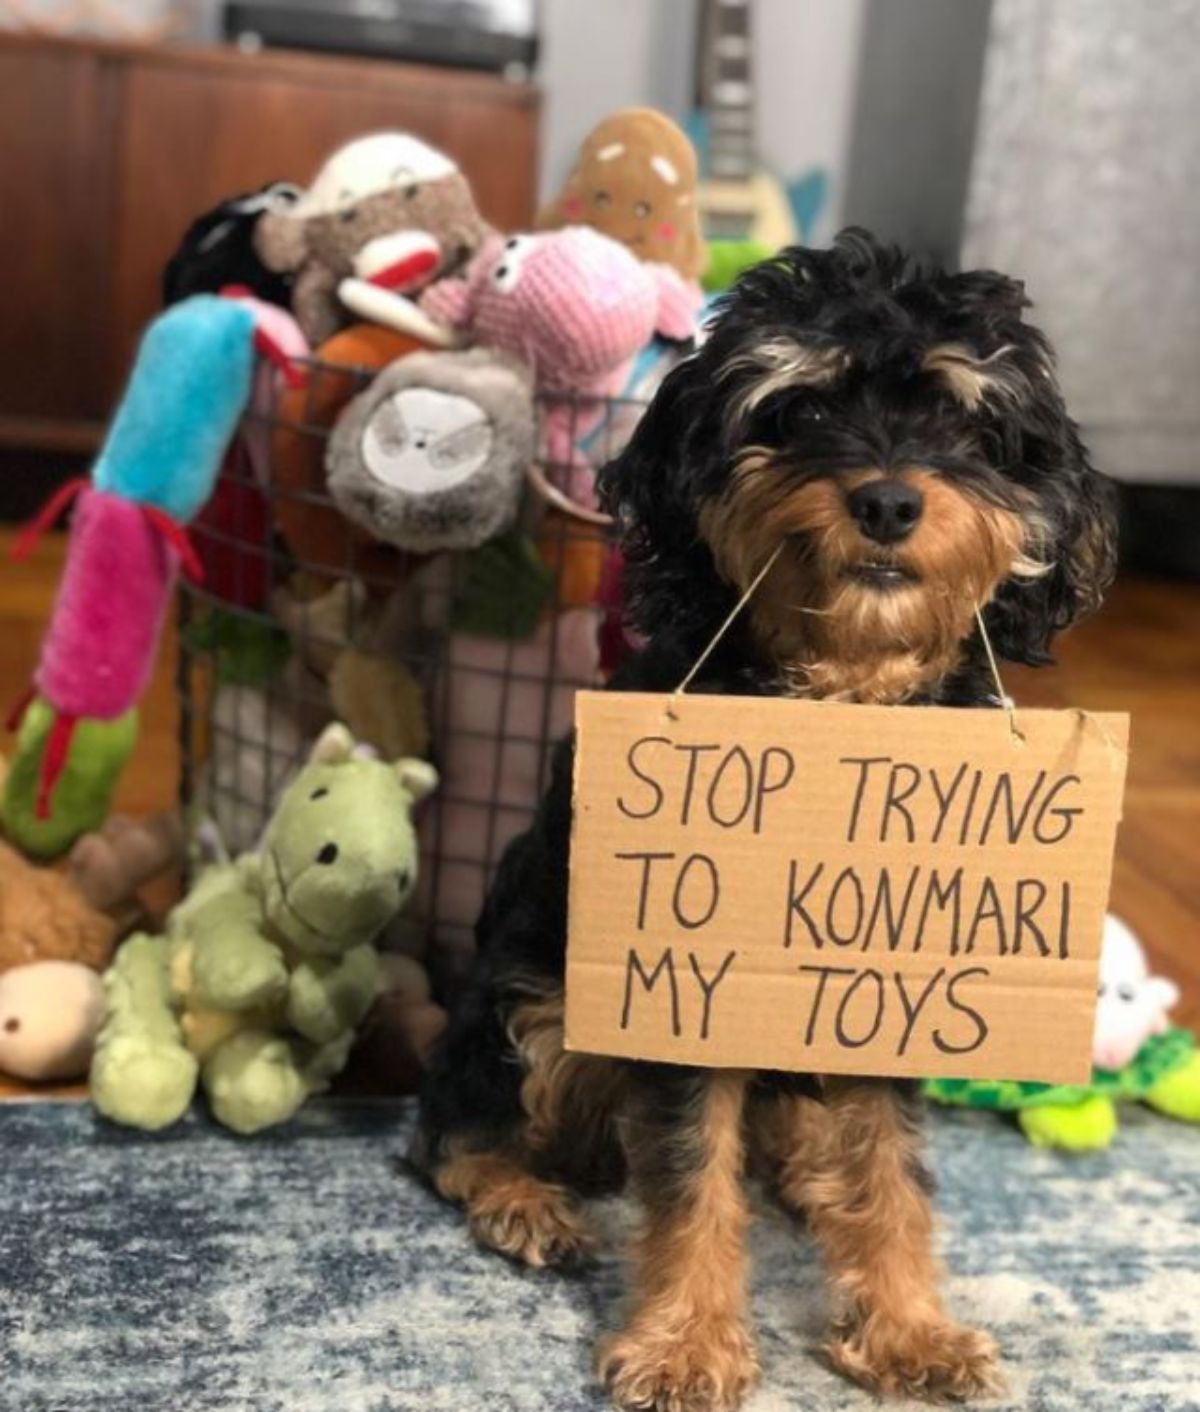 black and brown yorkshire terrier sitting in front of a black metal bucket of stuffed toys overflowing with some on the floor and holding a sign saying stop trying to konmari my toys